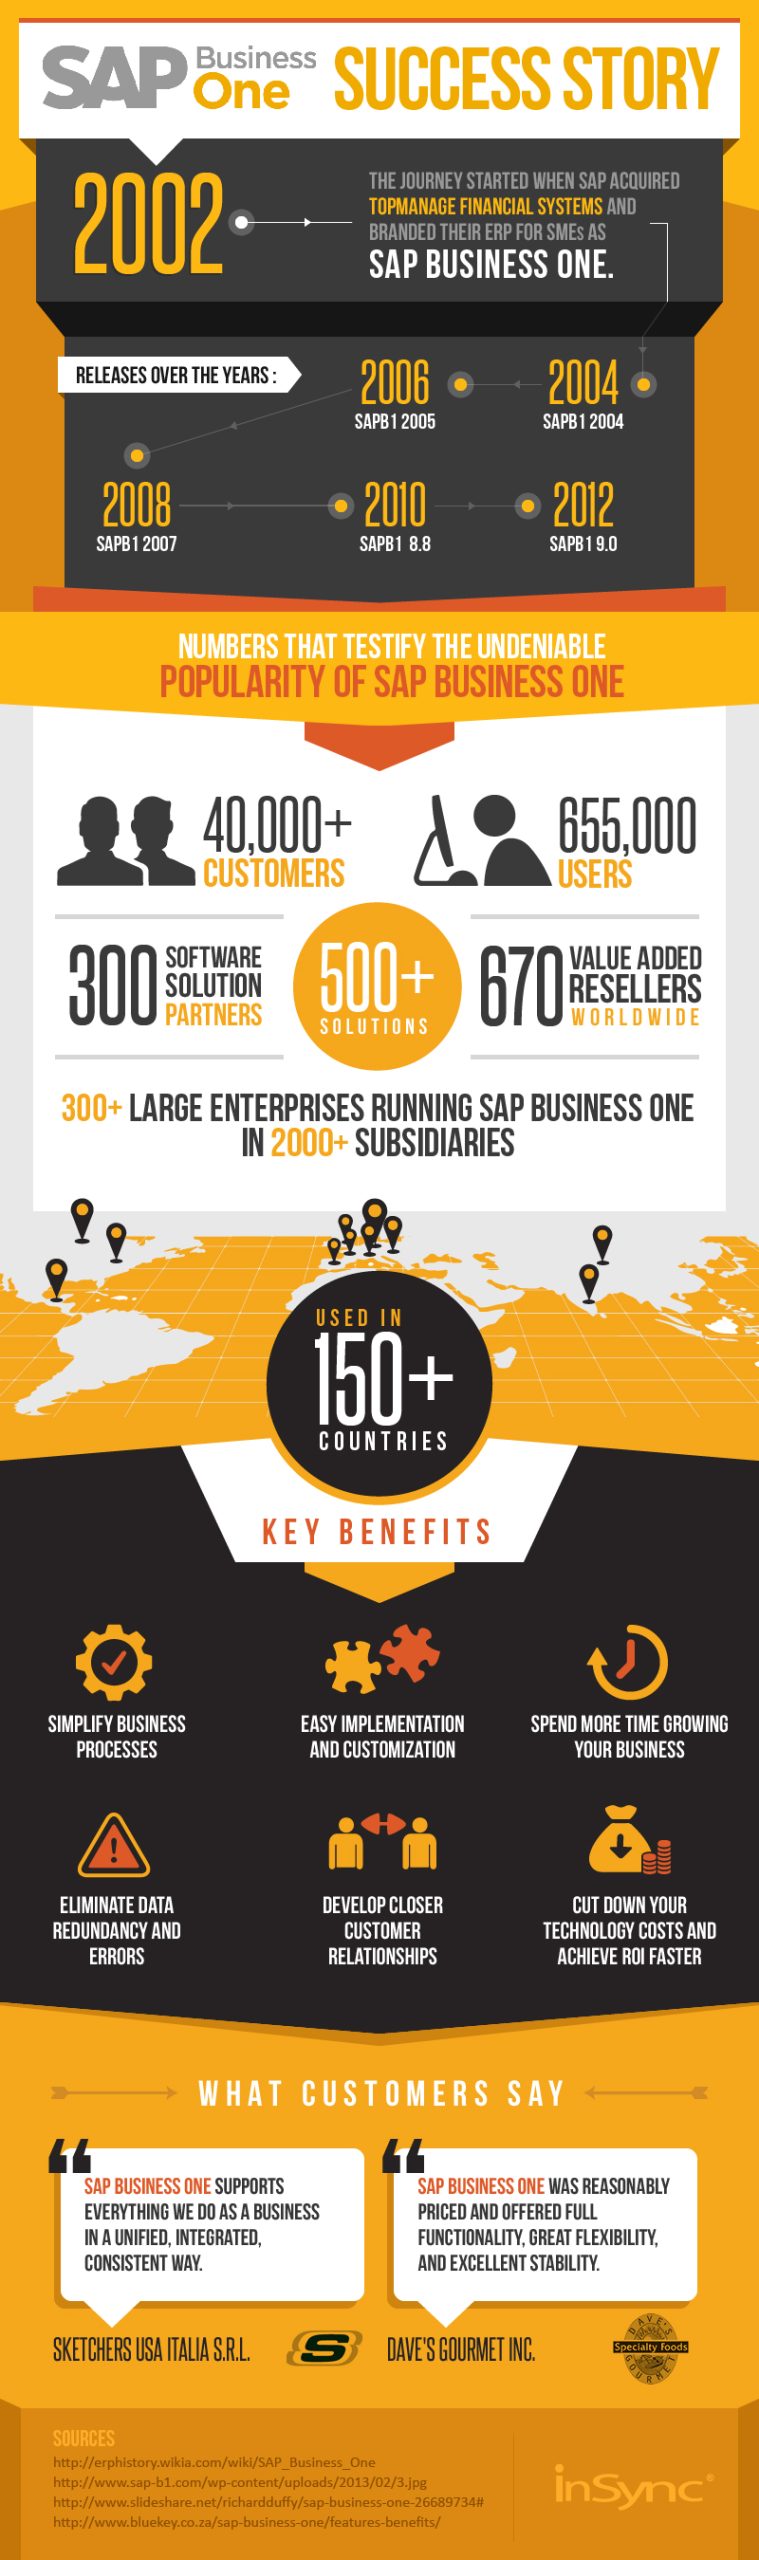 SAP Business One Success Story